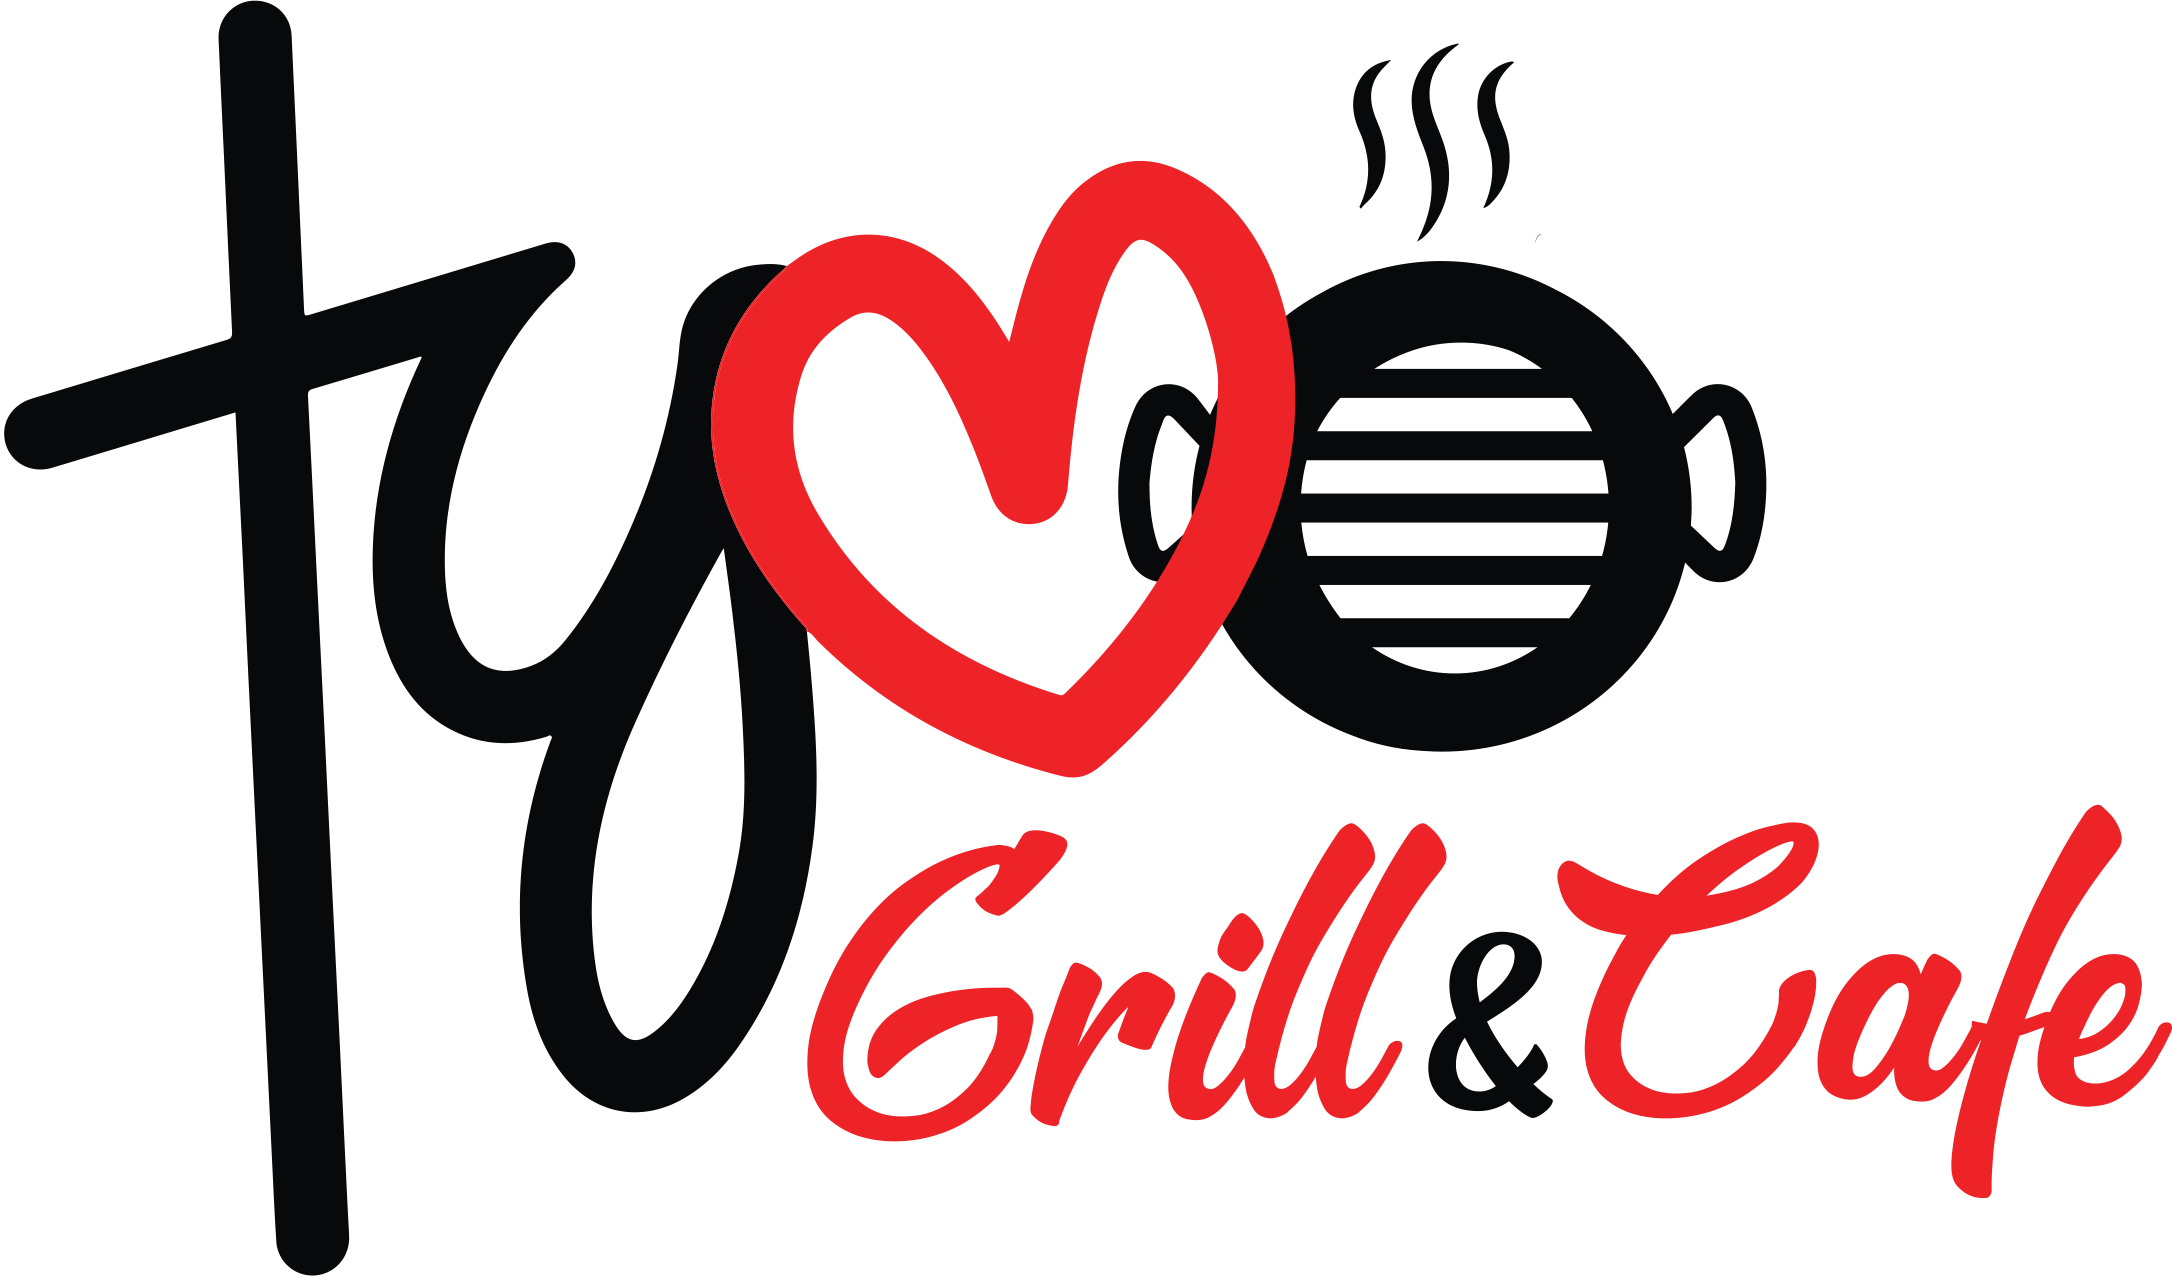 Privacy Policy | Tyvo Grill & Cafe